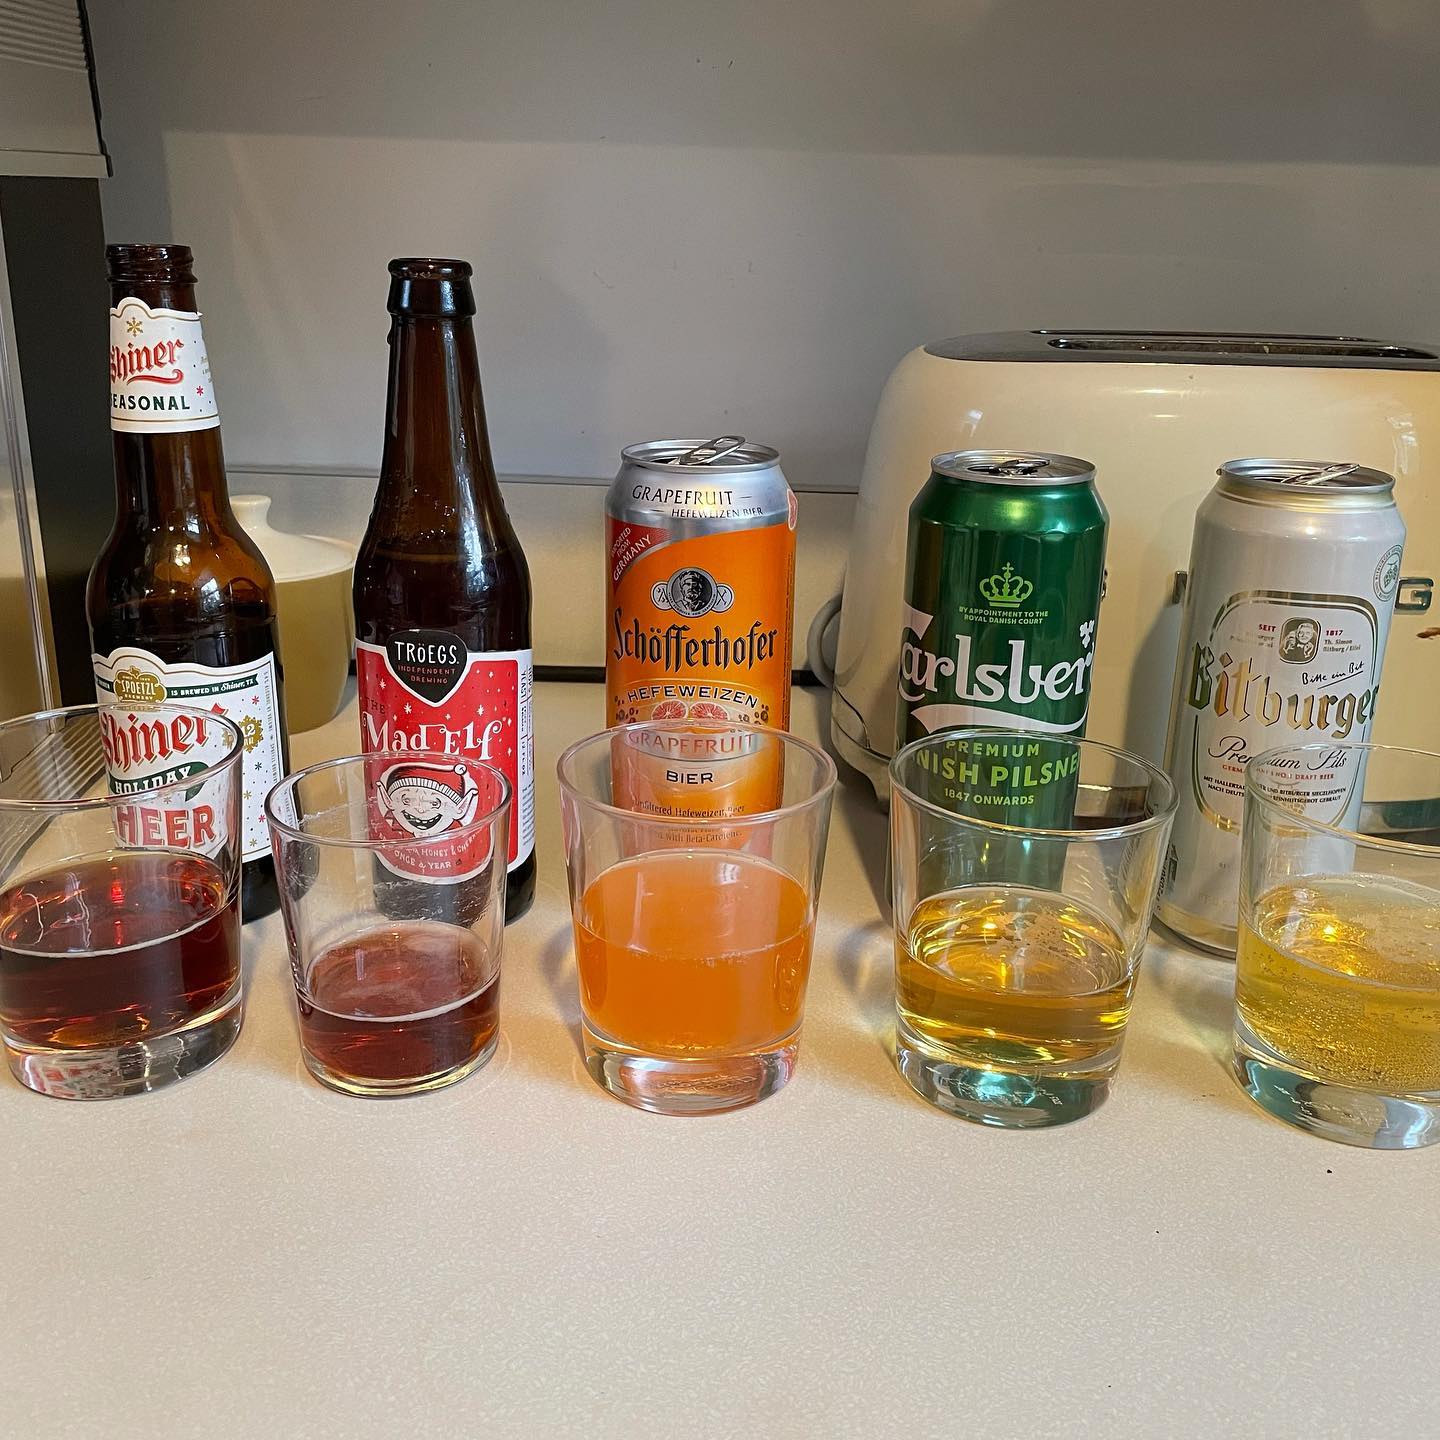 ‘Tie the season for flights of fancy (and beer).